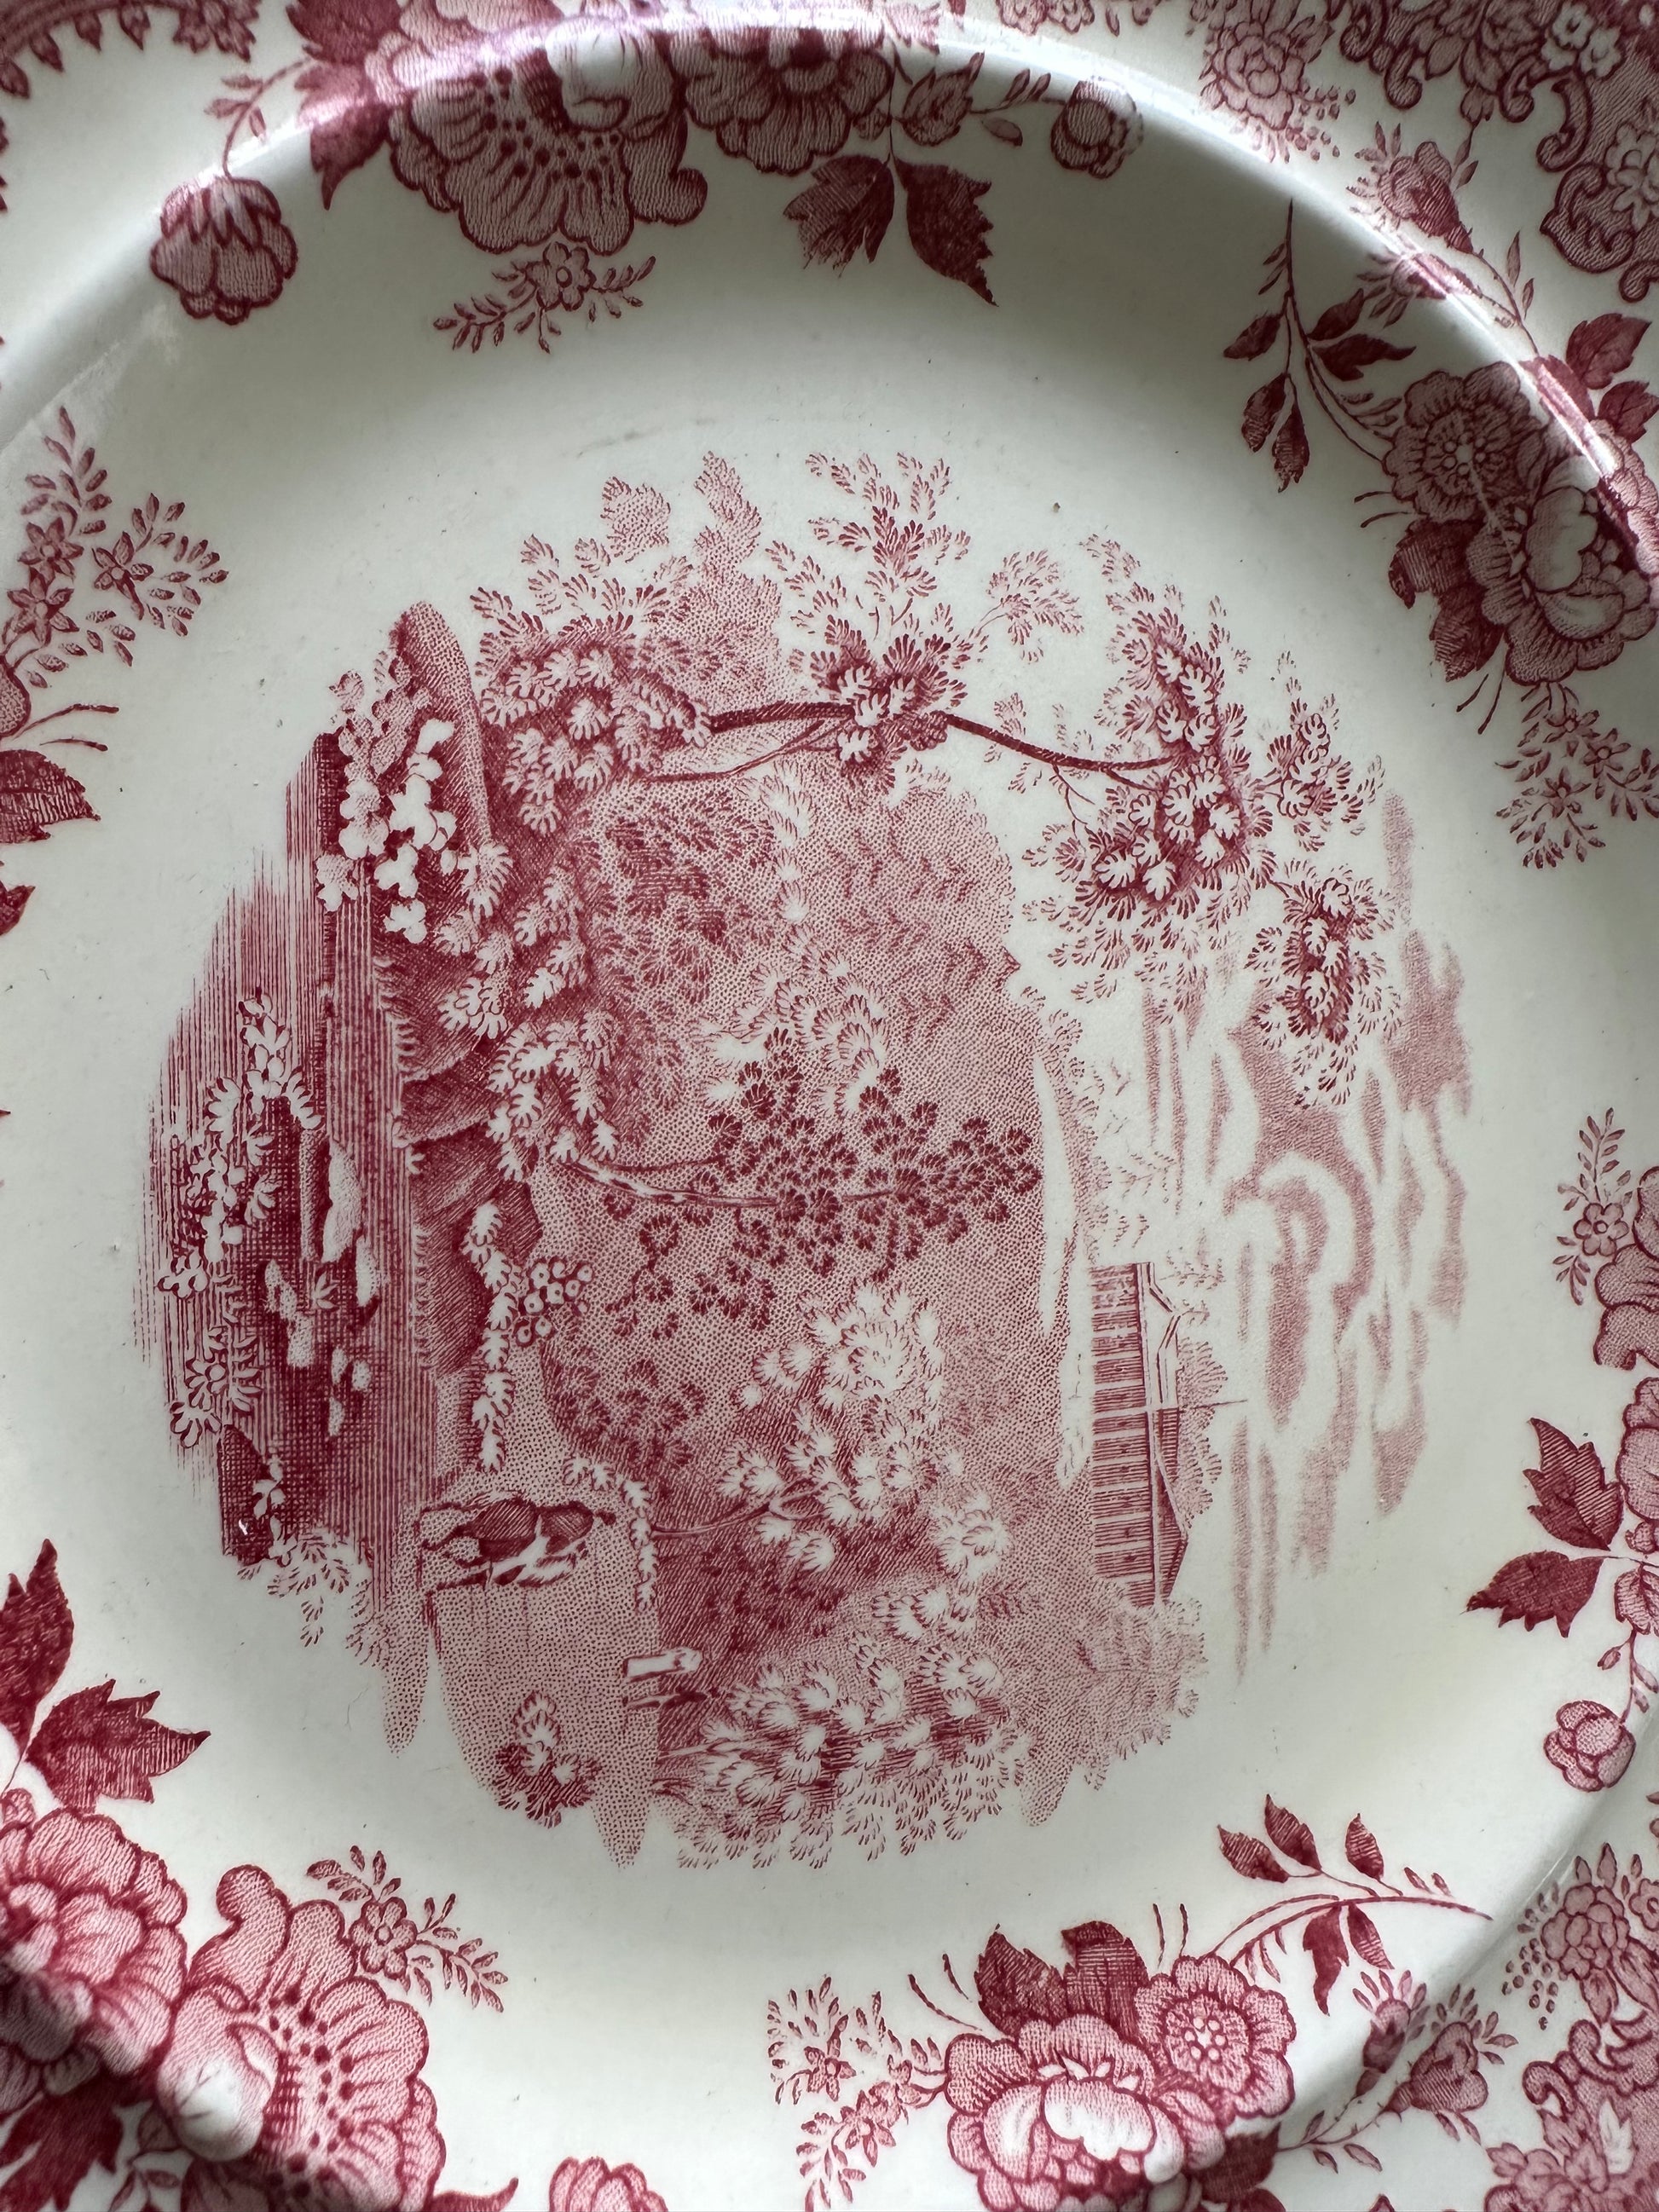 Set of 12 antique red and white transferware salad plates made by William Ridgway in 1830's - DharBazaar